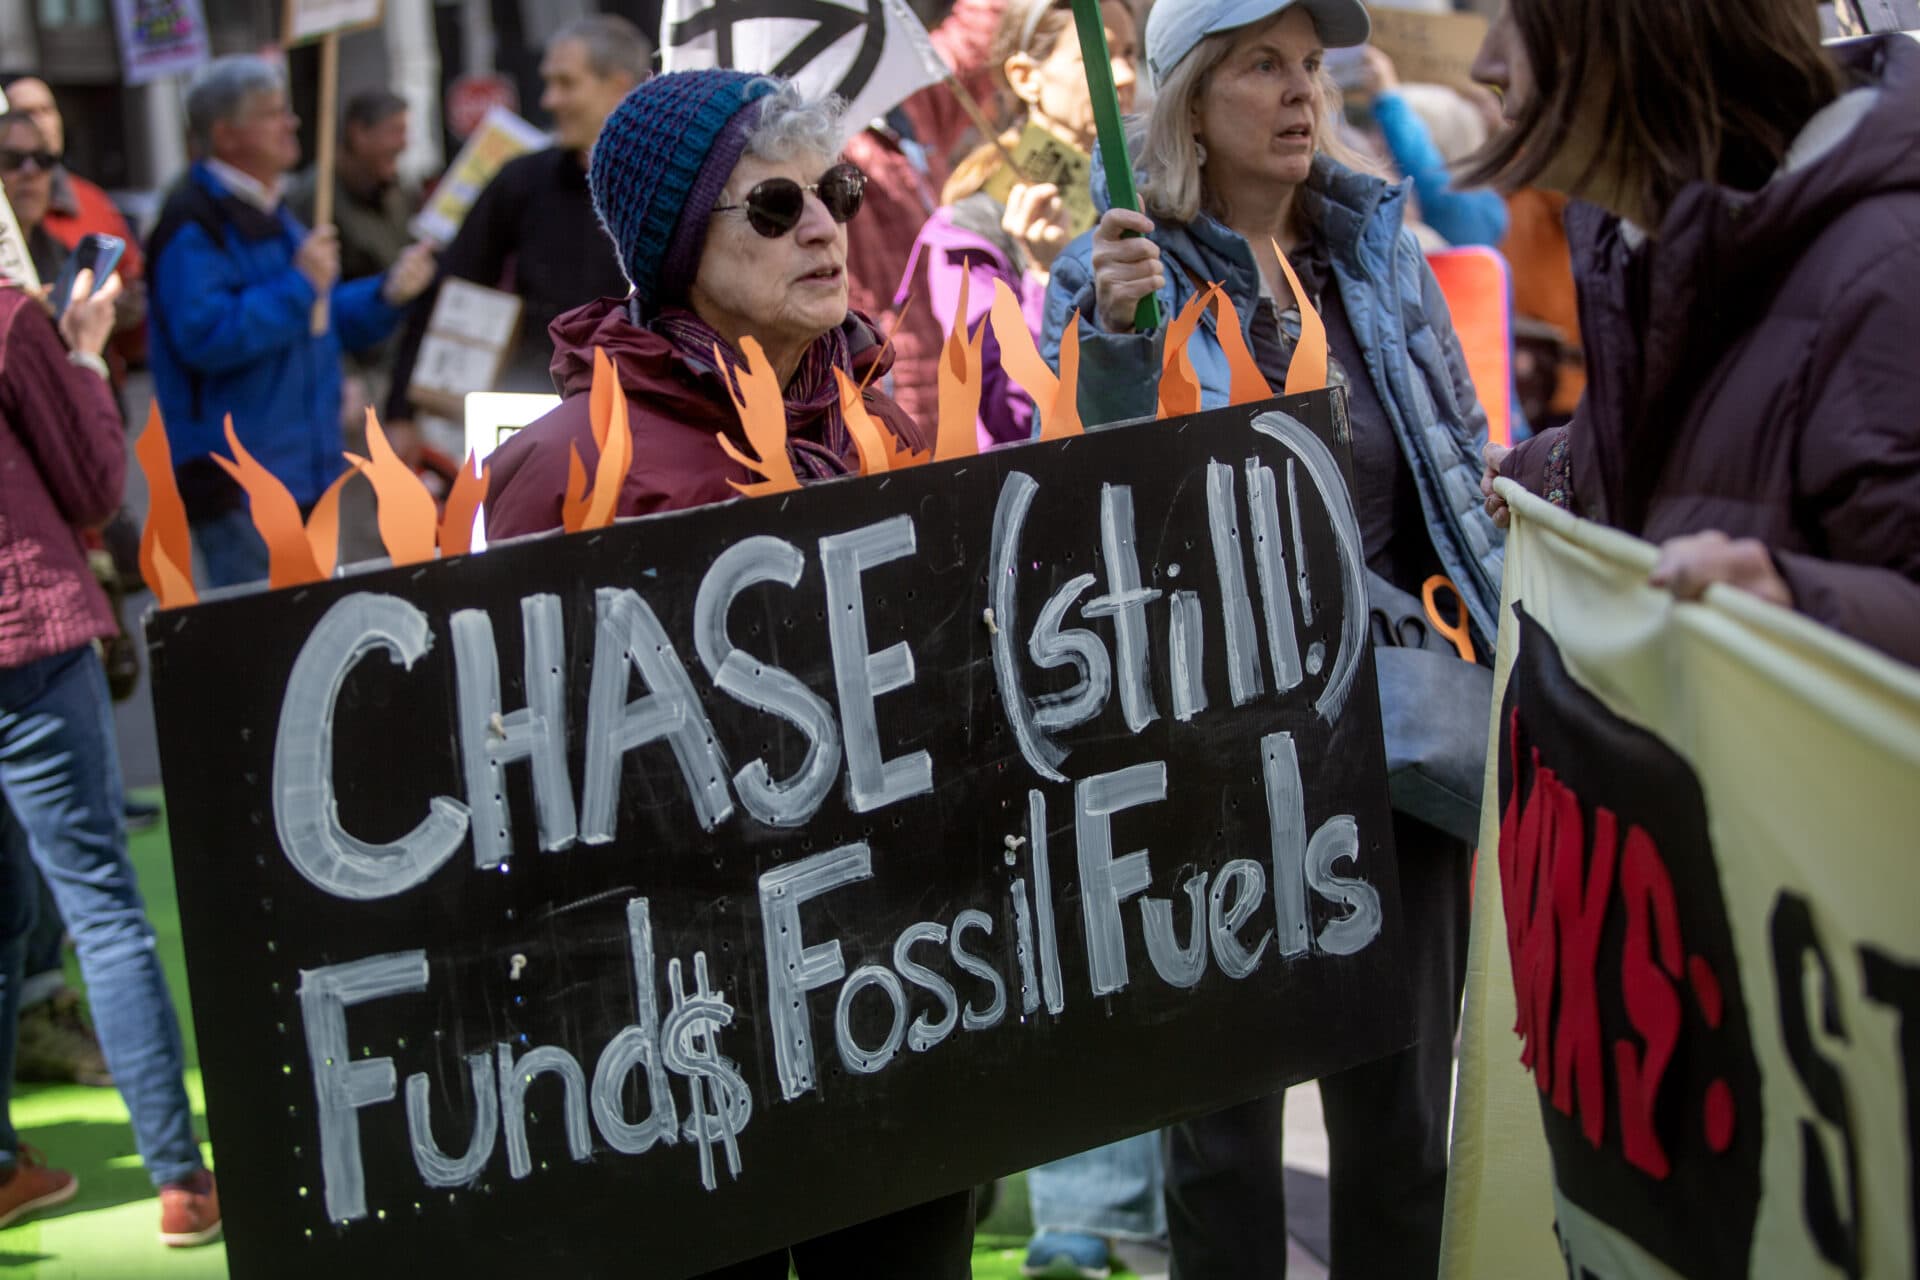 Boston protesters carry signs calling on banks to stop funding fossil fuel projects. (Credit: Robin Lubbock/WBUR)